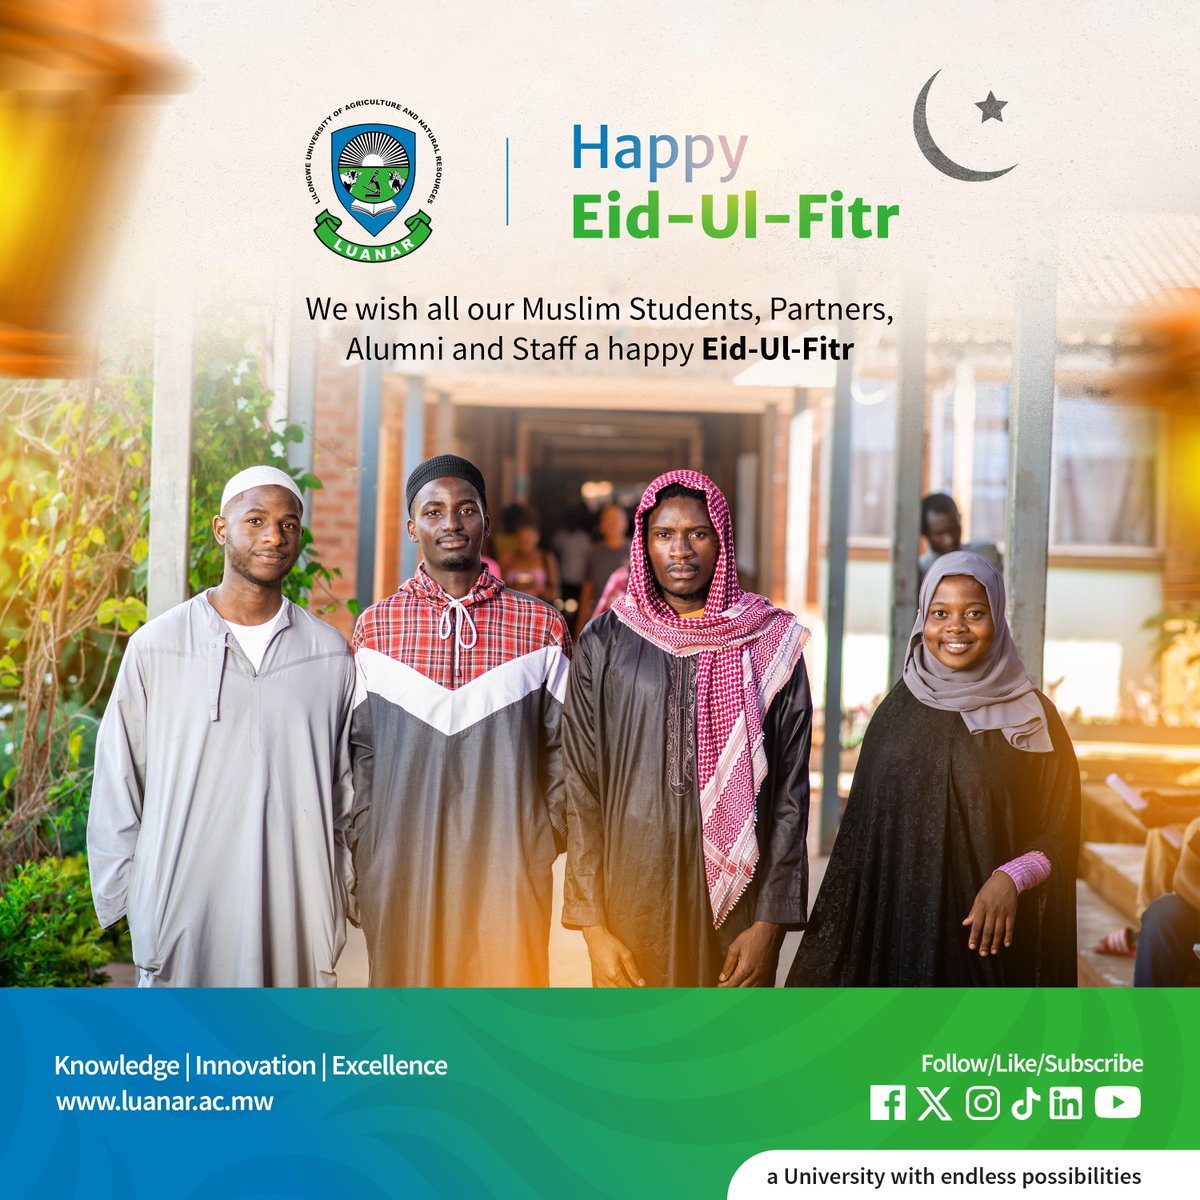 Eid Mubarak to all our Muslim students, partners, staff and alumni.